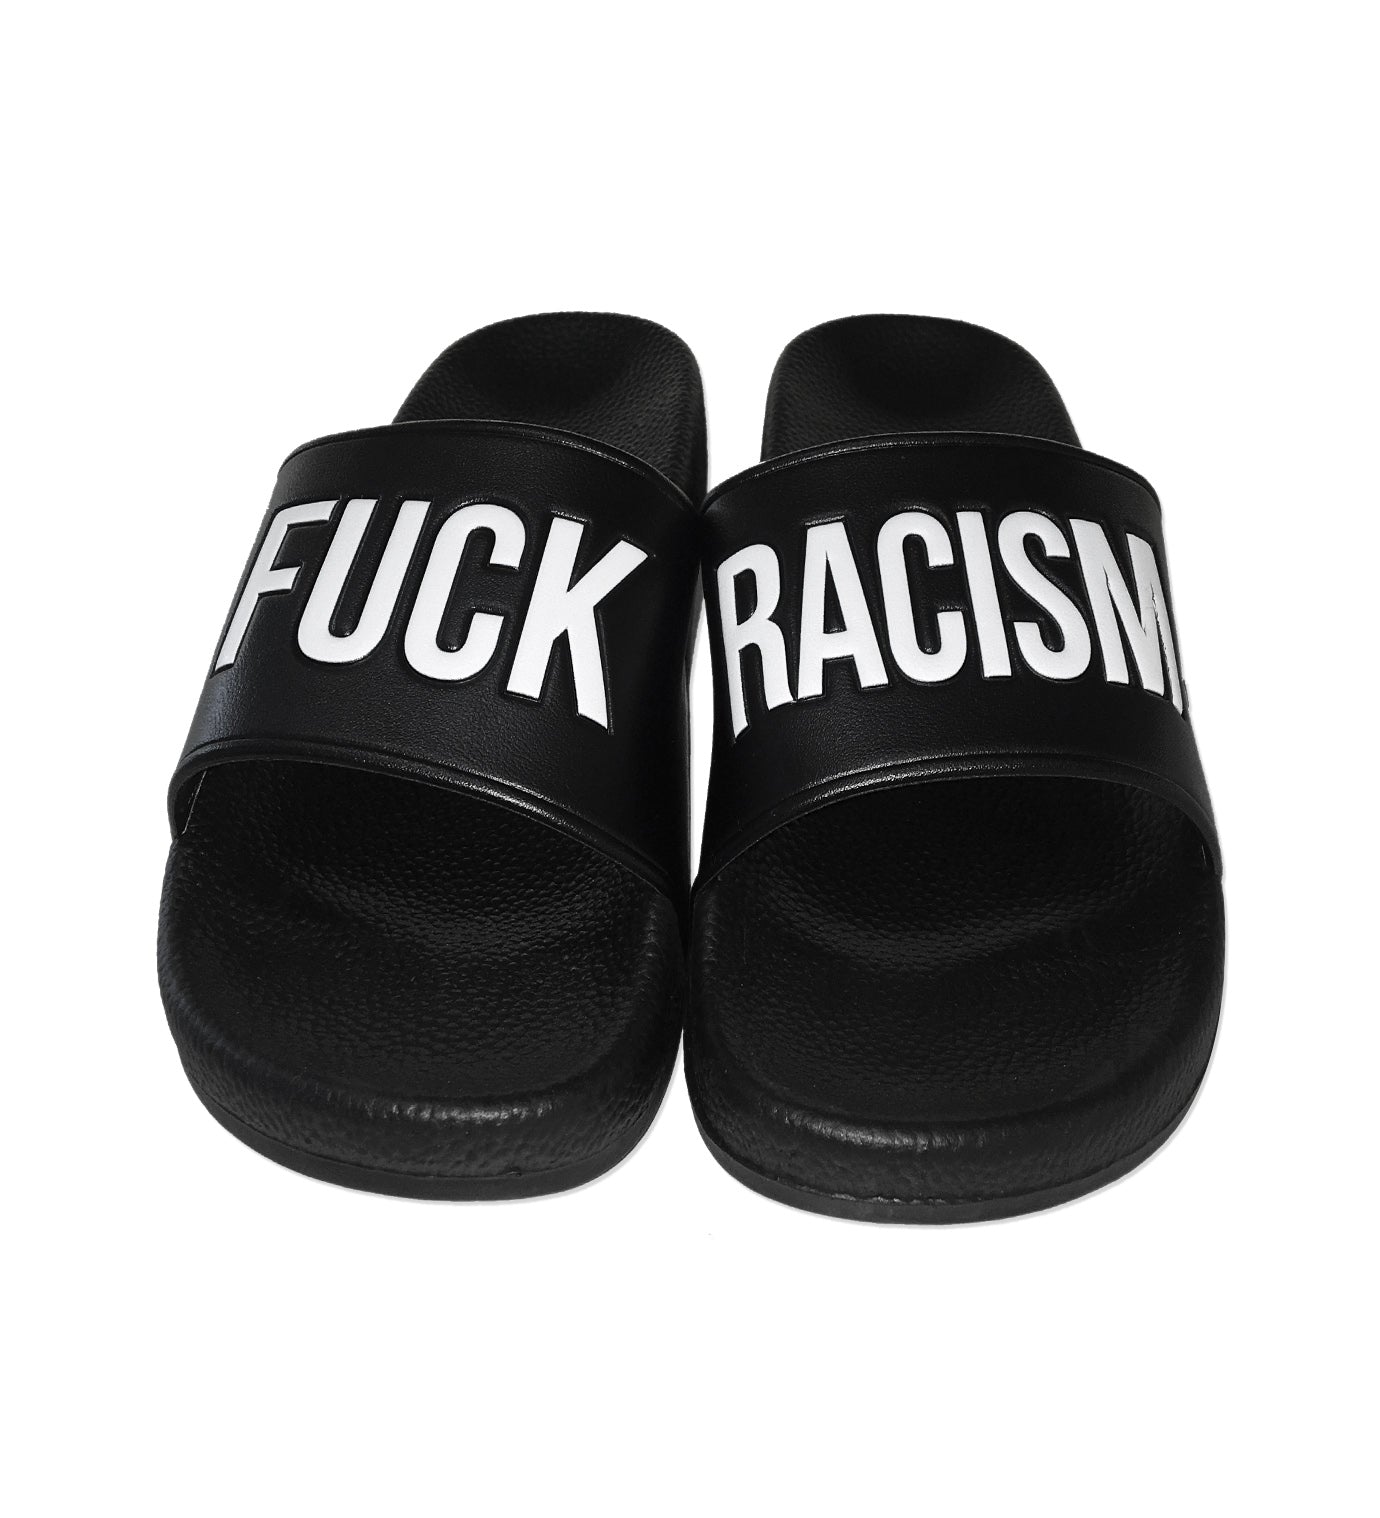 claquettes fuck racism slides - fuck racism - fvck - forverycoolkids -sandales  - streetwear - nike slides - anti raciste -  black own brand